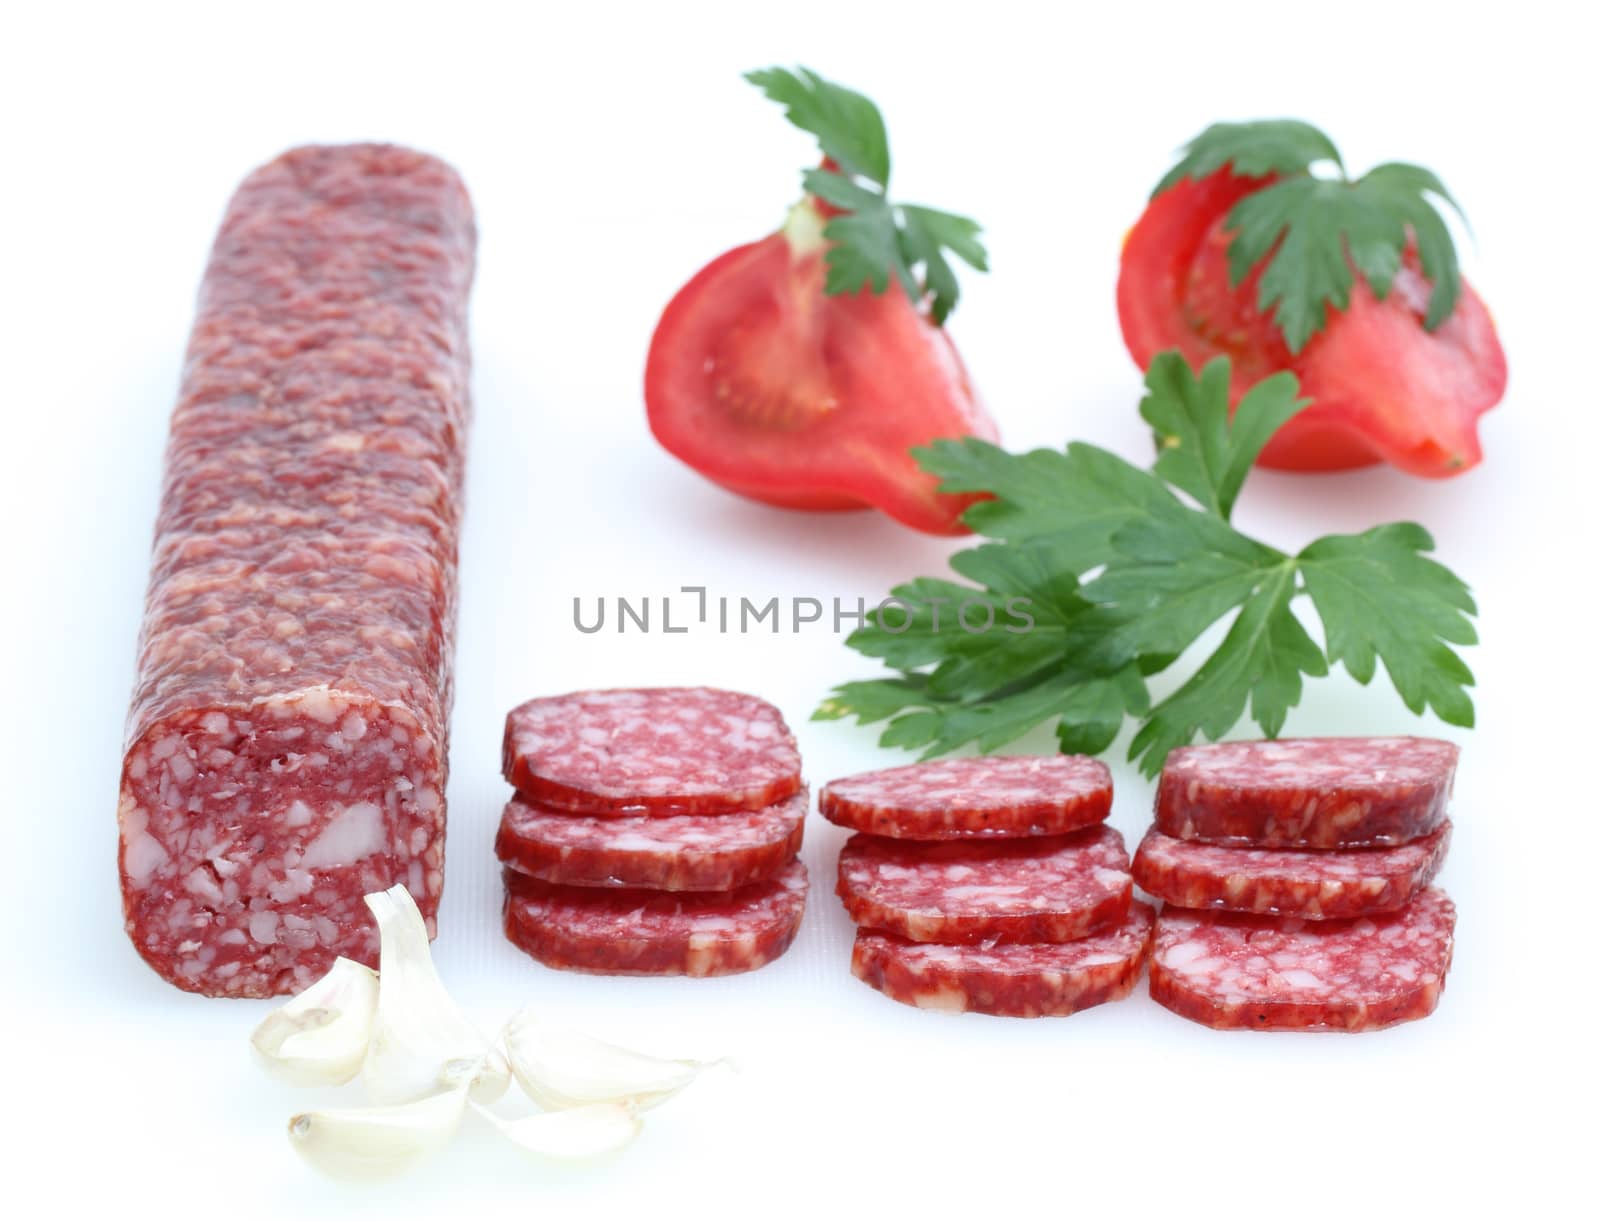 salami with tomato and parsley